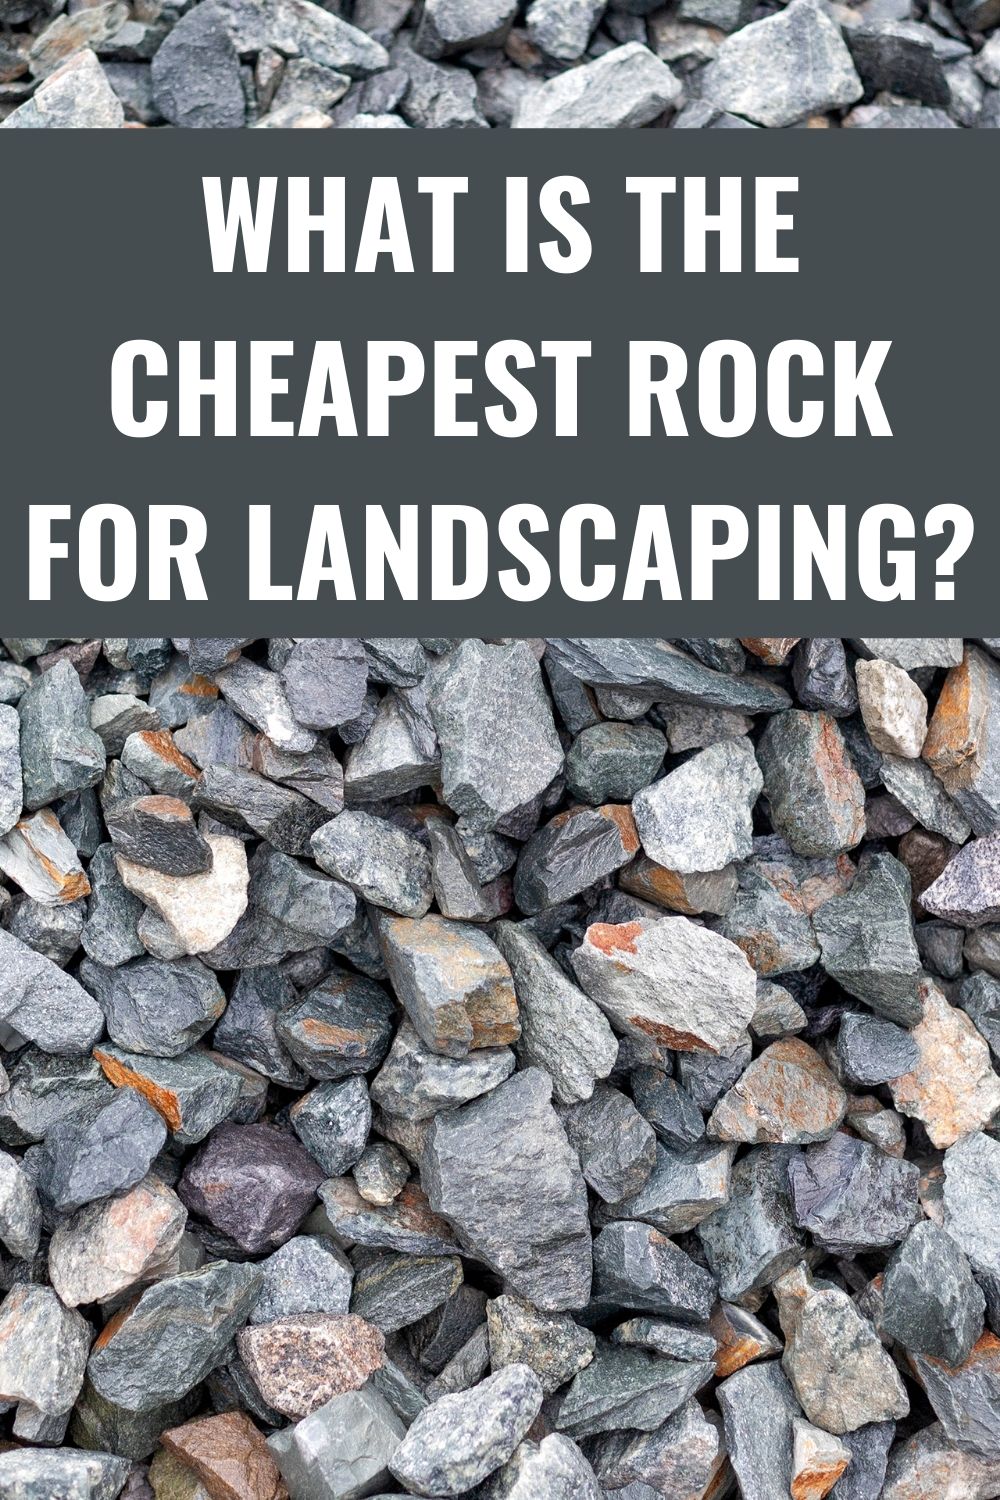 What Is The Cheapest Rock For Landscaping?